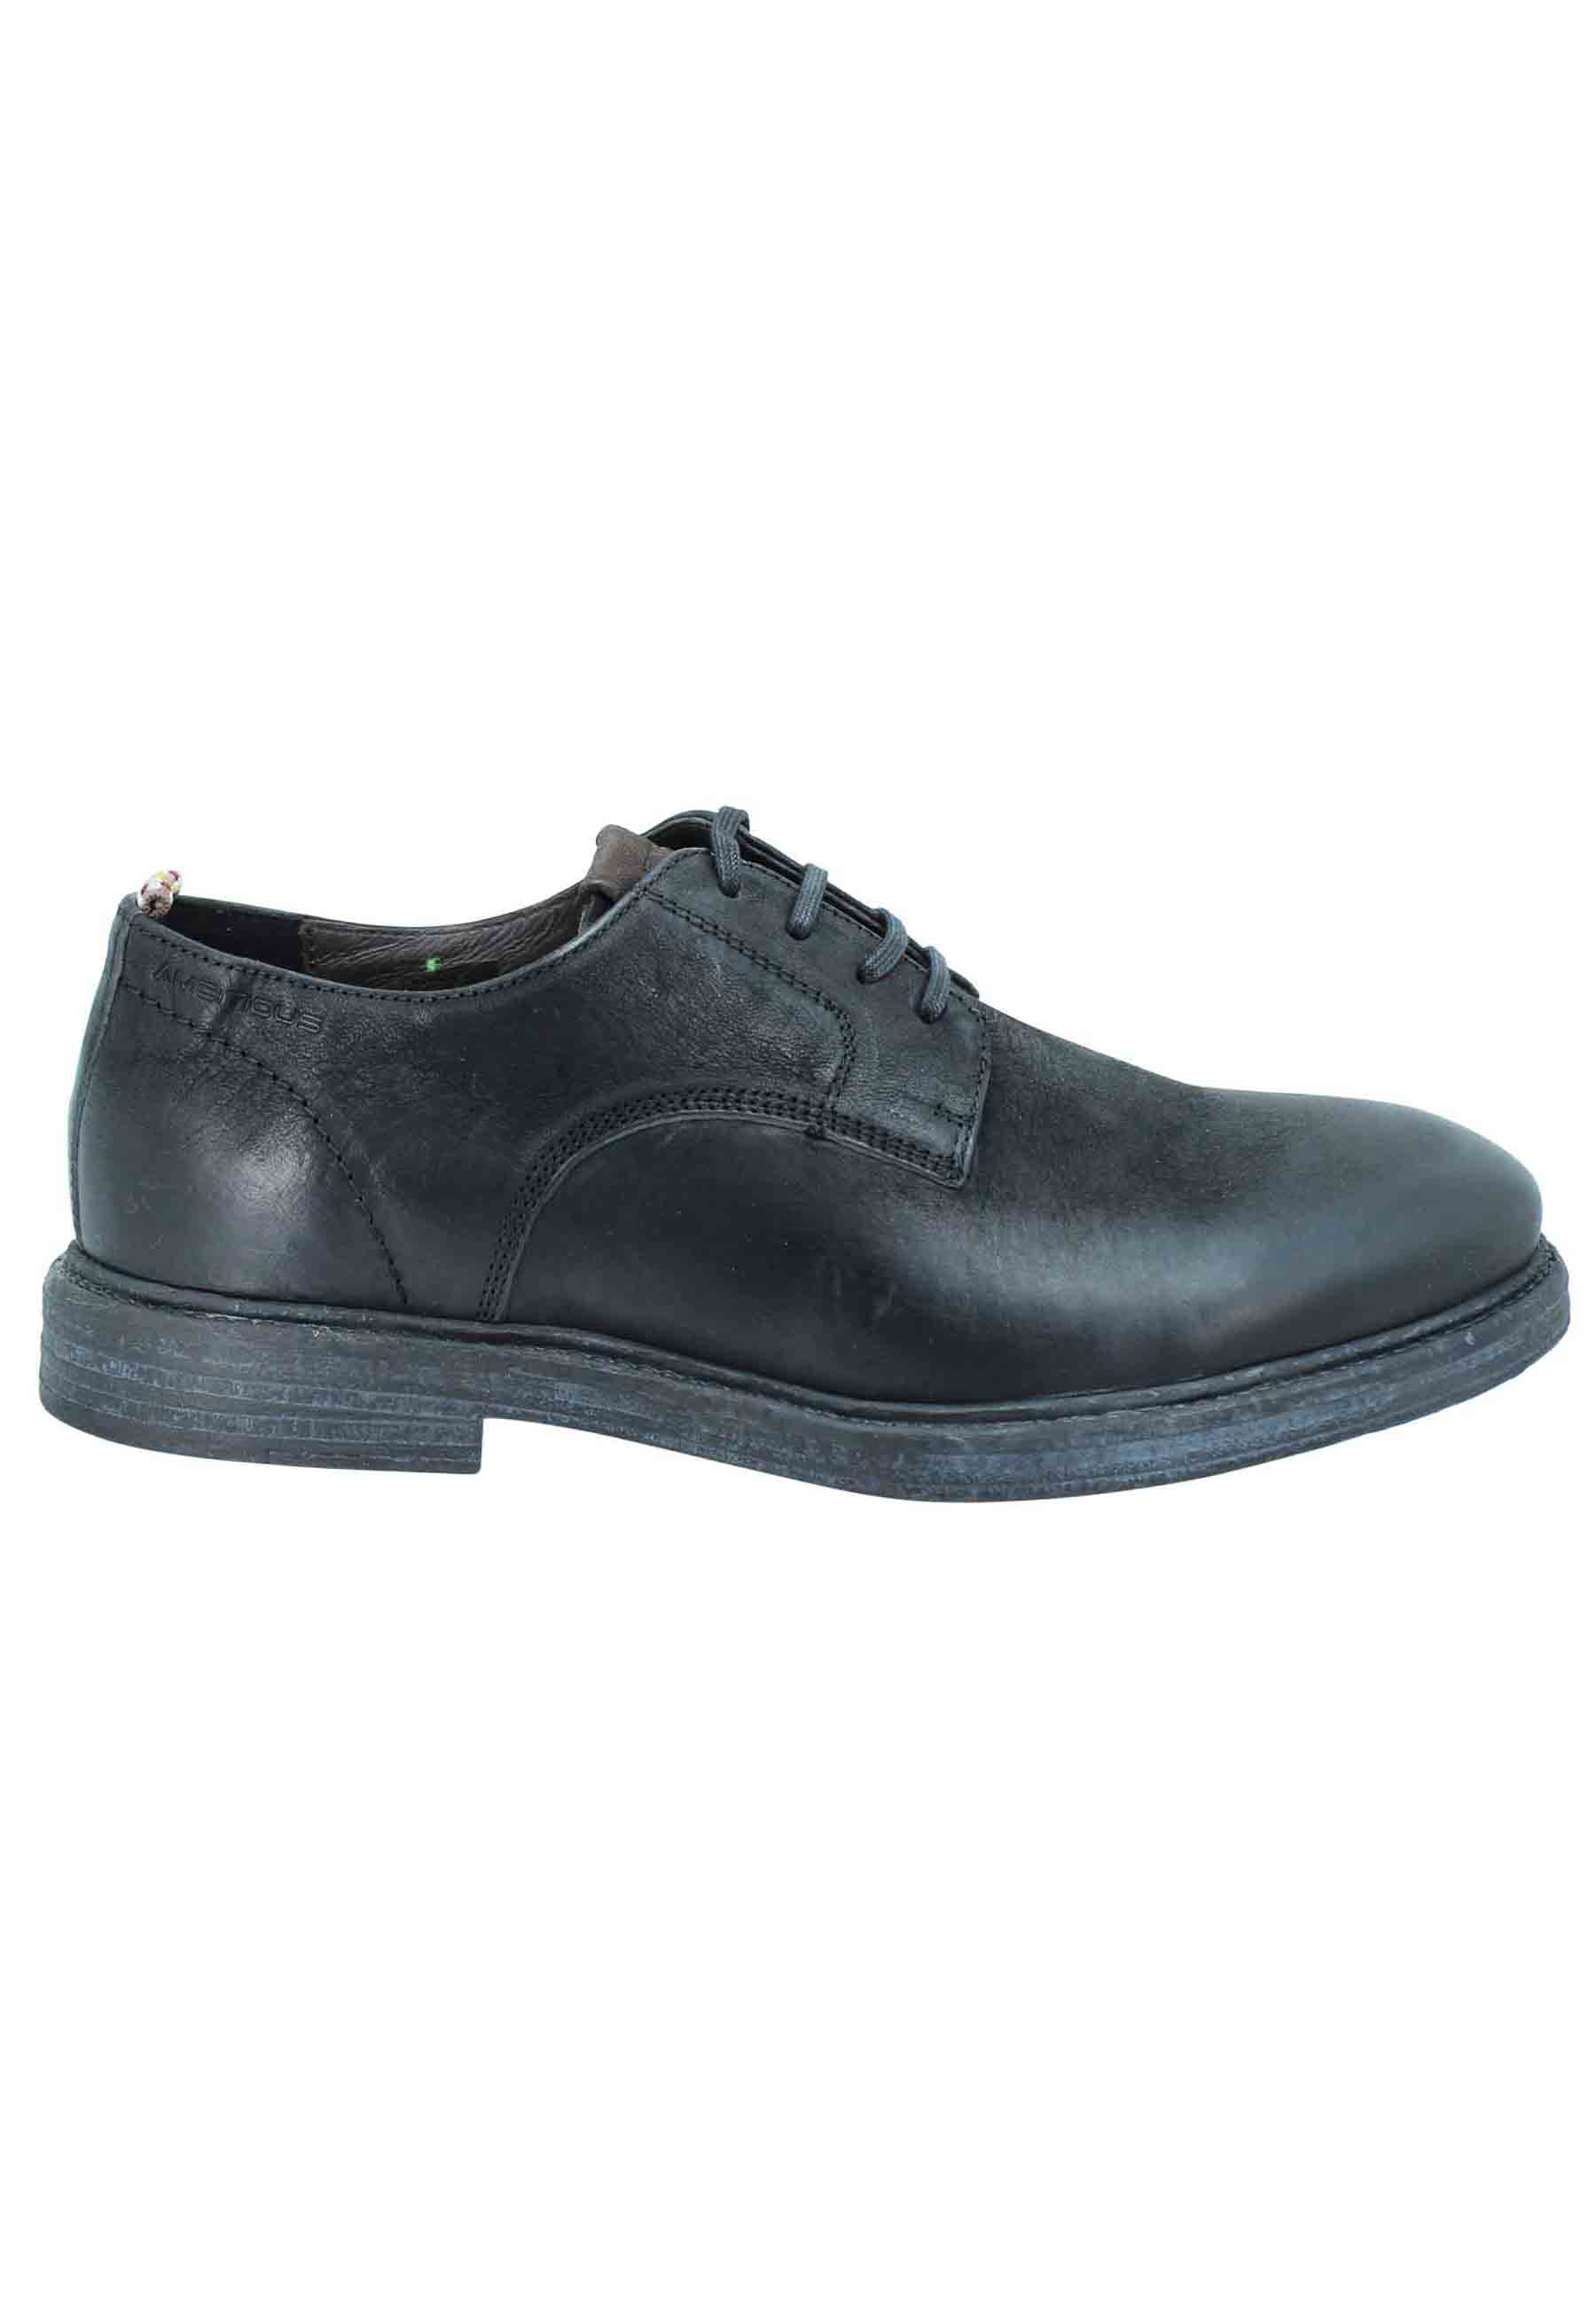 Men's lace-up shoes in black leather, rubber sole and memory foam insole